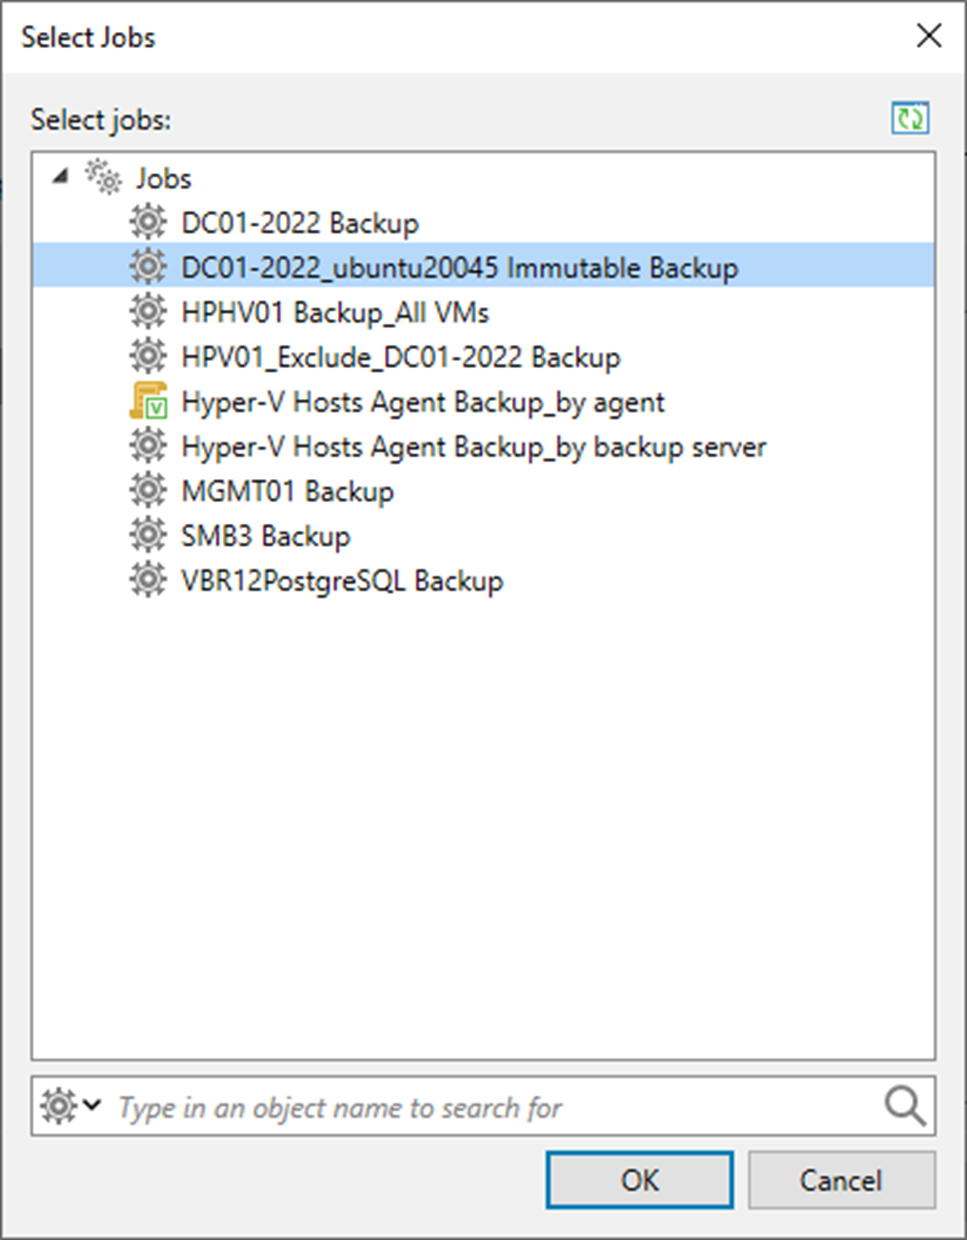 092423 0522 Howtocreate6 - How to create a Backup Copy Job with Periodic copy from the backup job workload at Veeam Backup and Replication v12